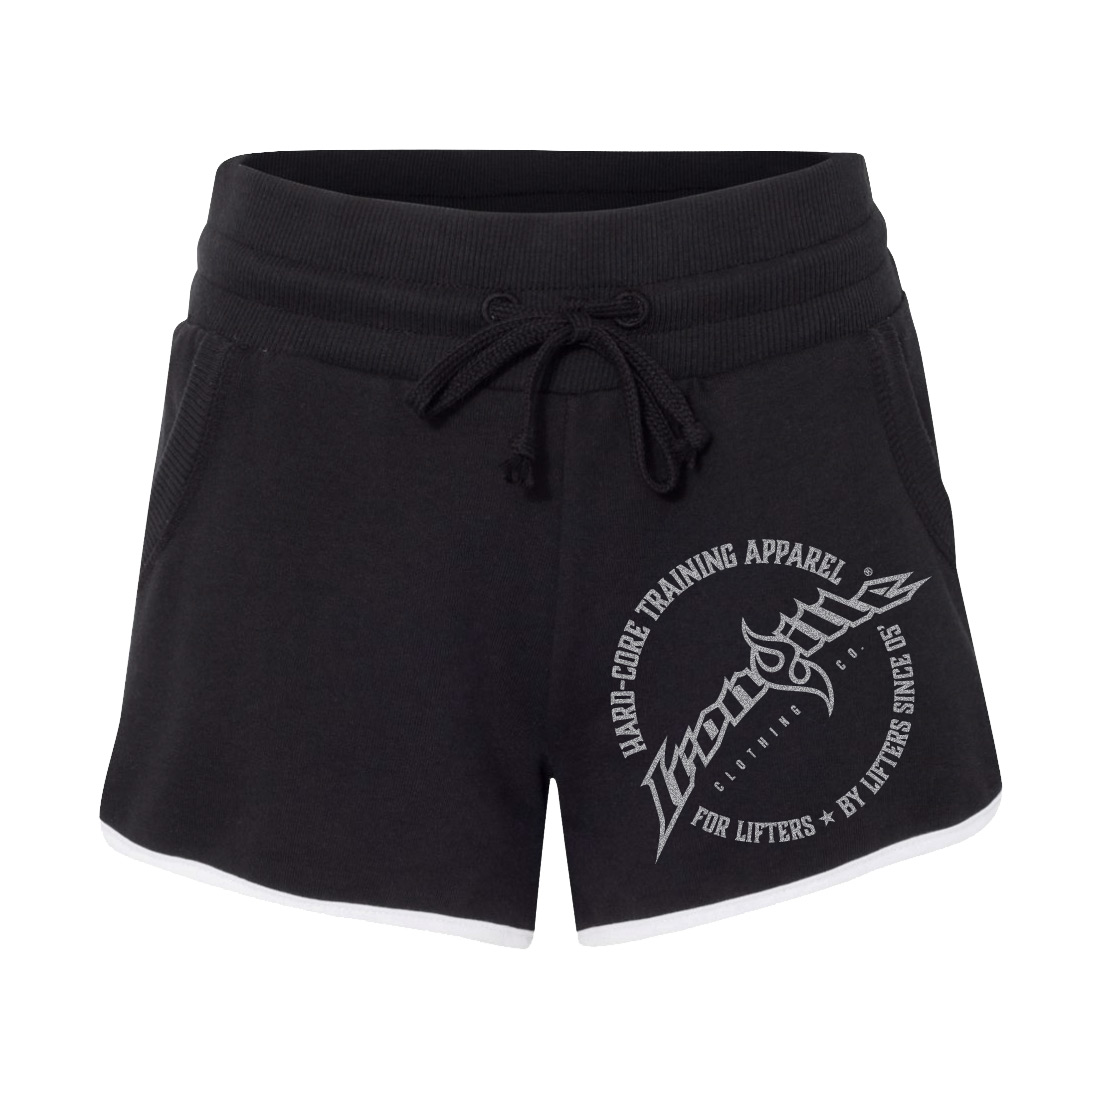 https://www.ironville.com/wp-content/uploads/2017/05/ironville-womens-weightlifting-pocket-gym-shorts-front-circle-logo-black.jpg